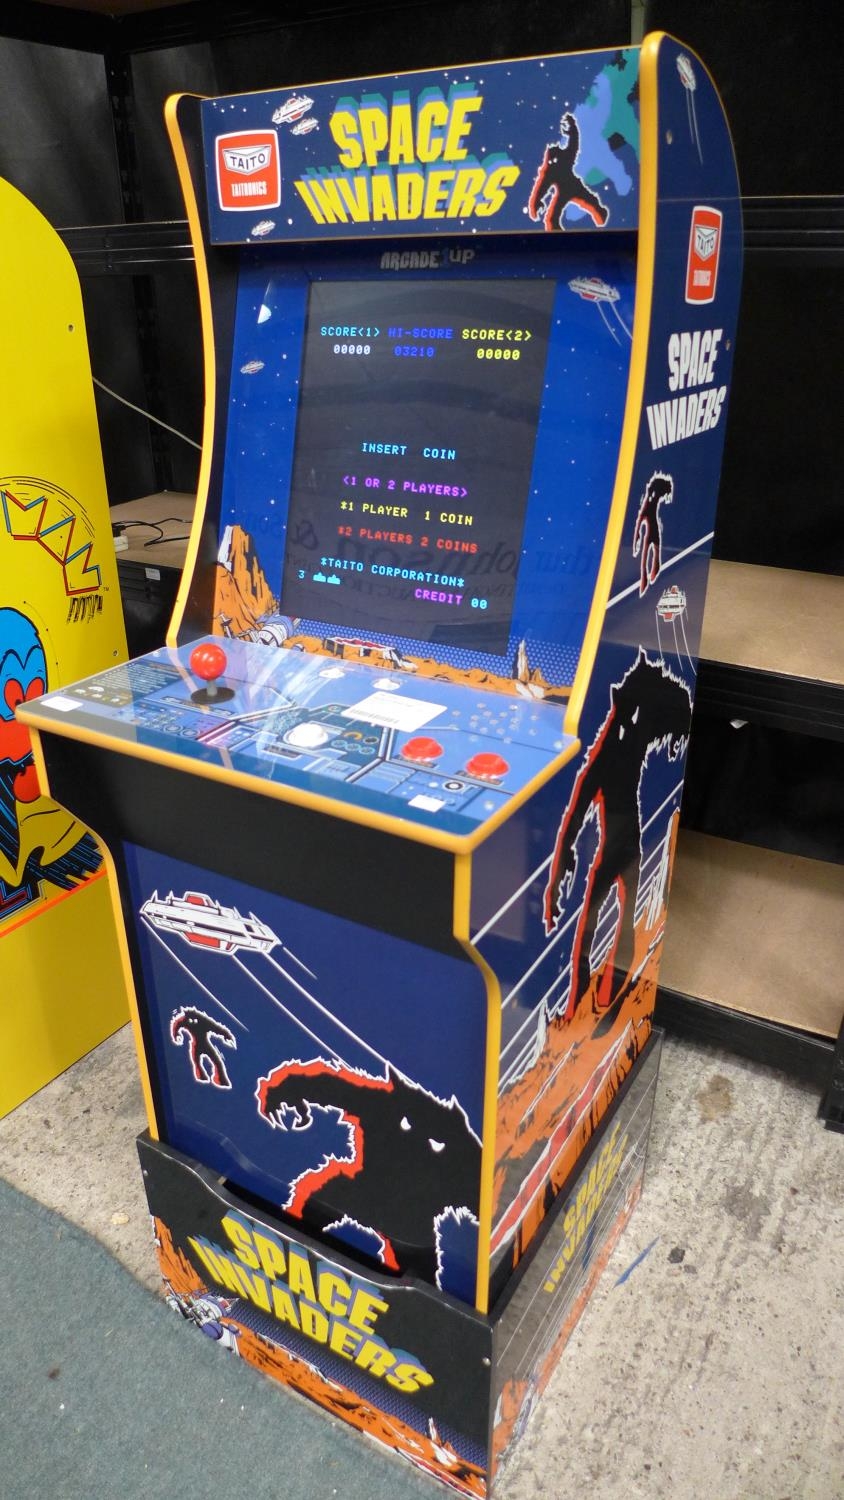 An Arcade1Up Arcade Game - space invaders edition 1222552/215 